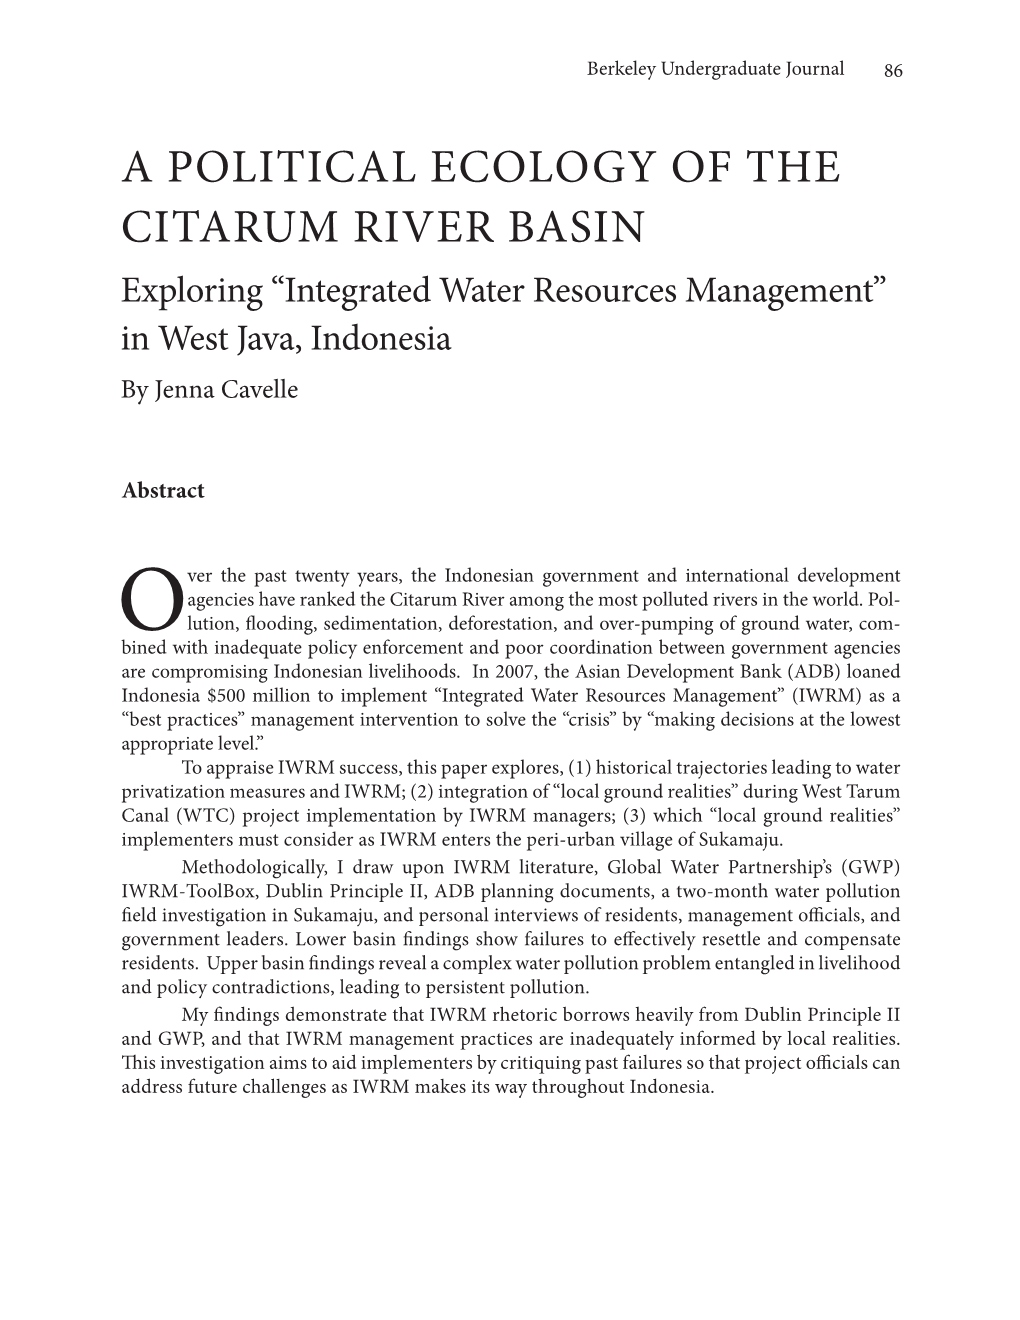 A POLITICAL ECOLOGY of the CITARUM RIVER BASIN Exploring “Integrated Water Resources Management” in West Java, Indonesia by Jenna Cavelle